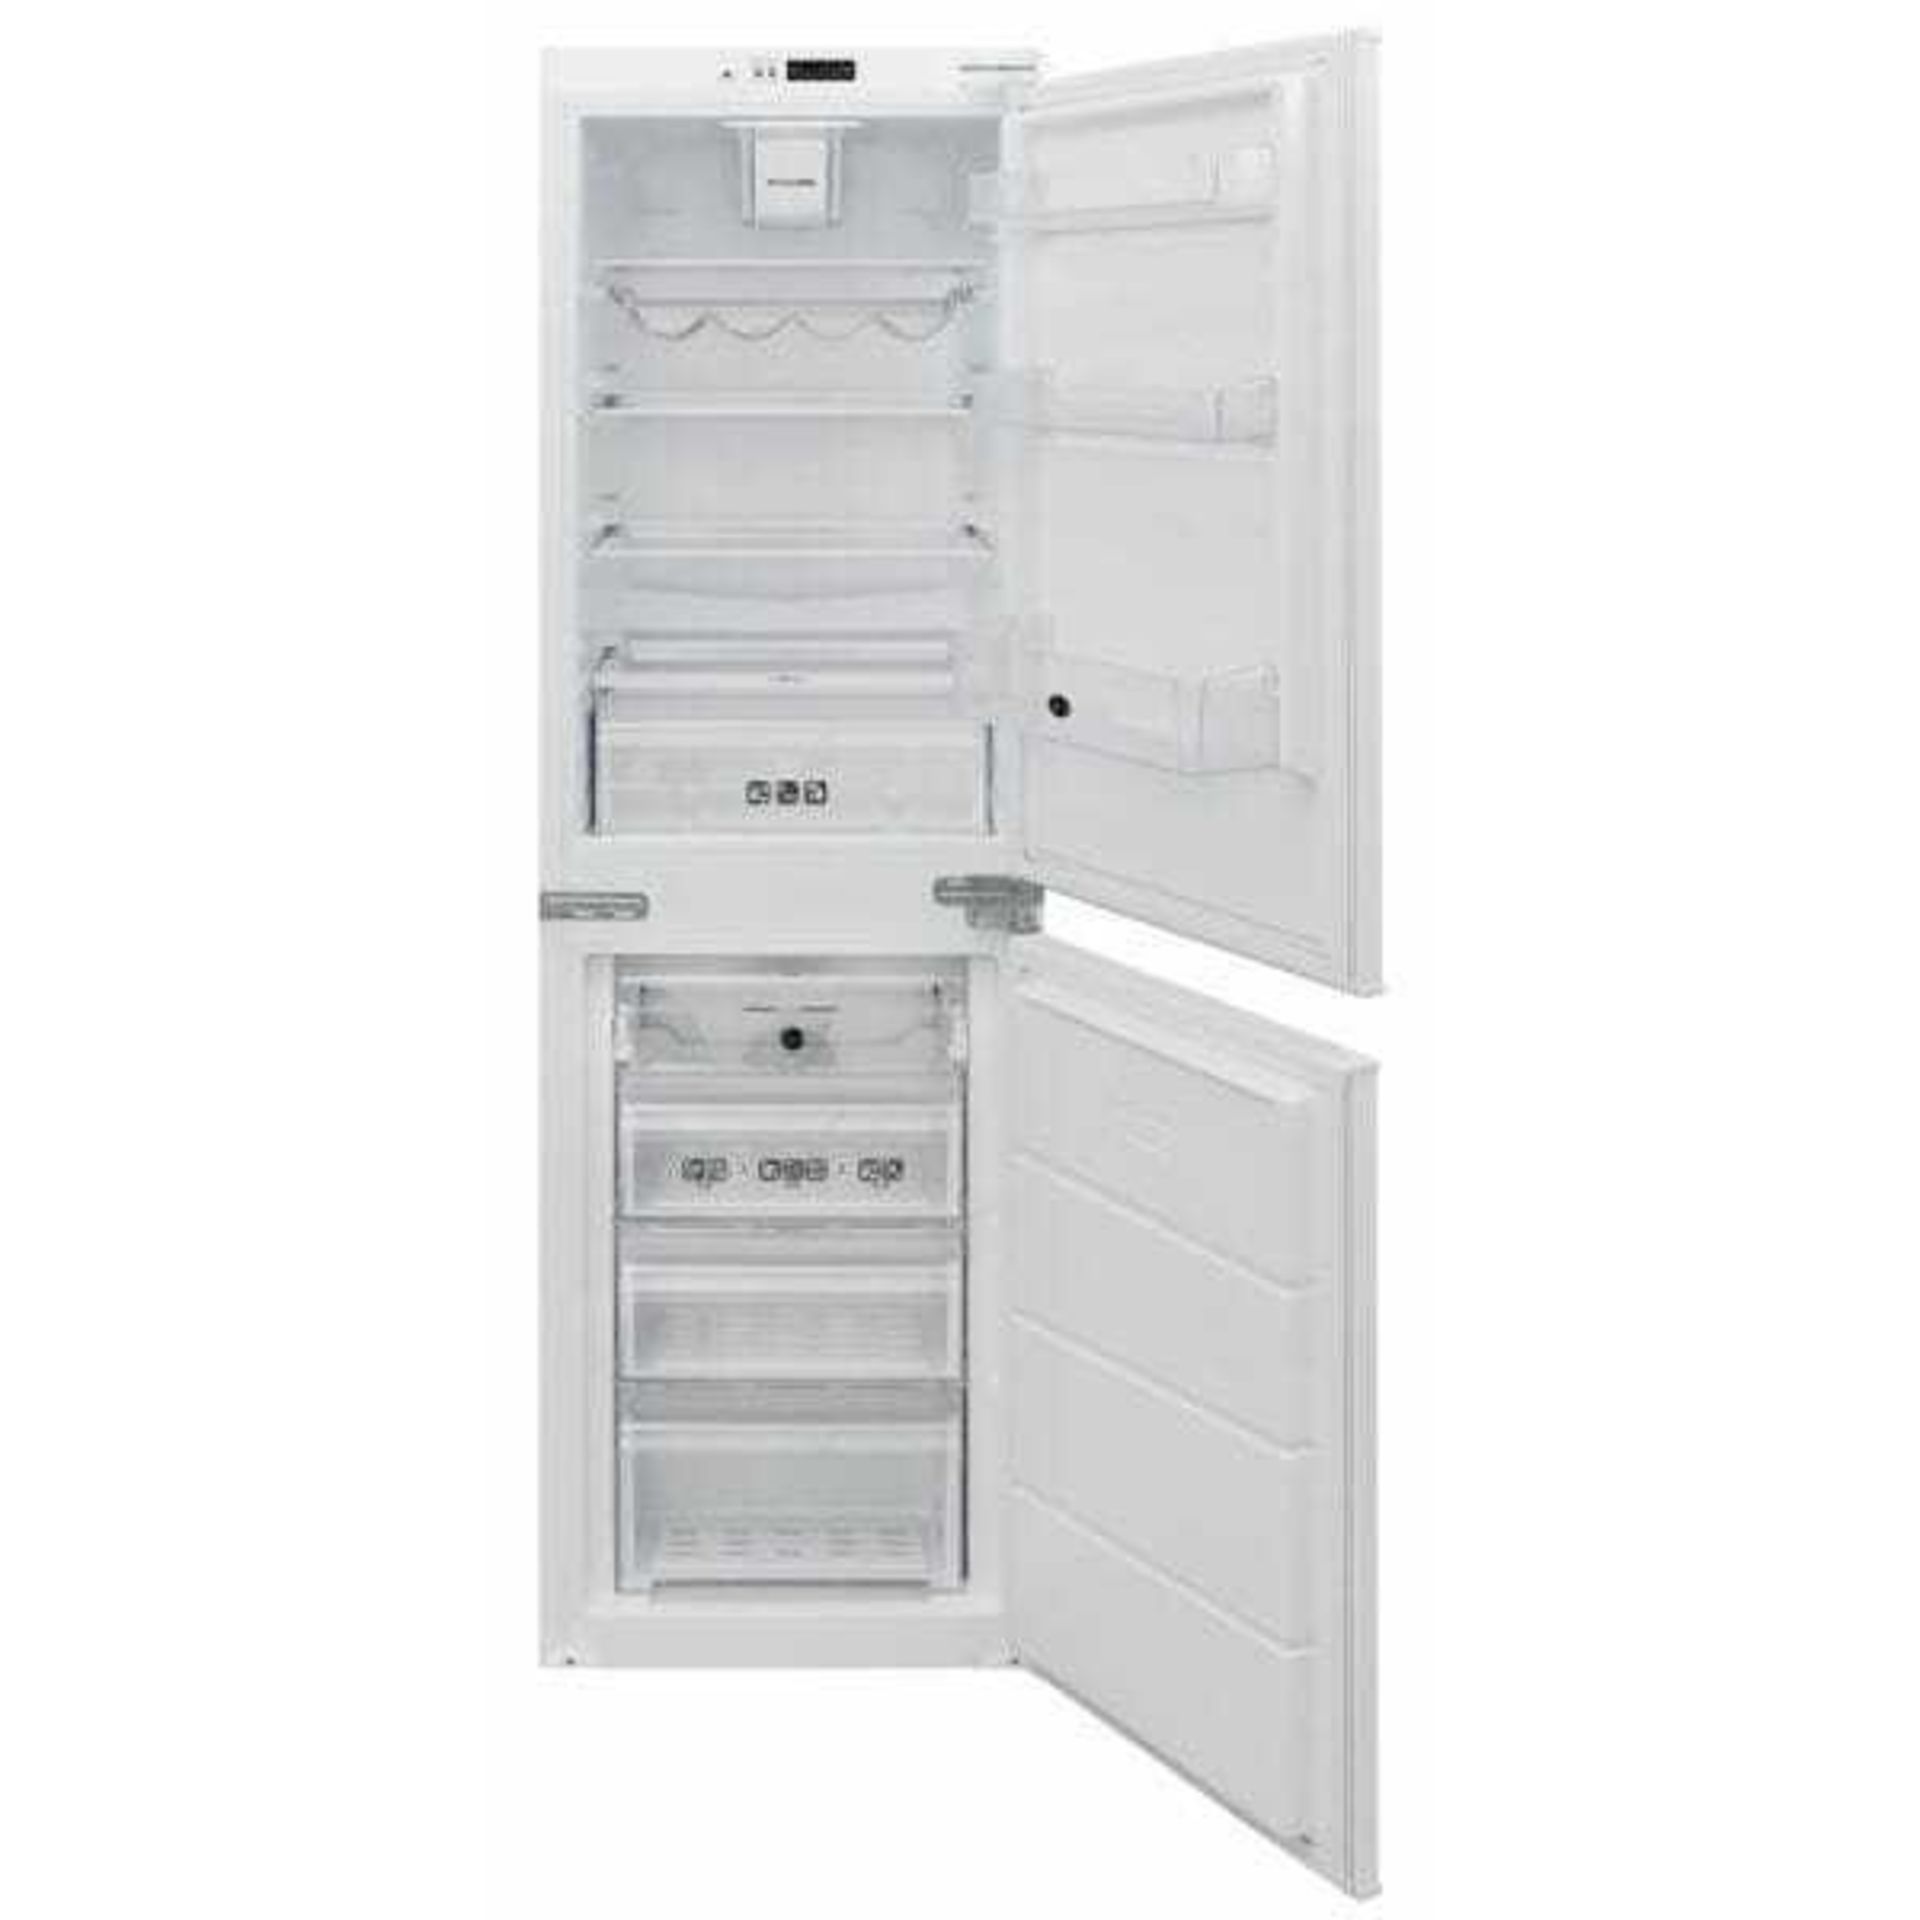 (Sp) RRP £290 Lot To Contain 1 Integrated Fridge Freezer - Image 2 of 4